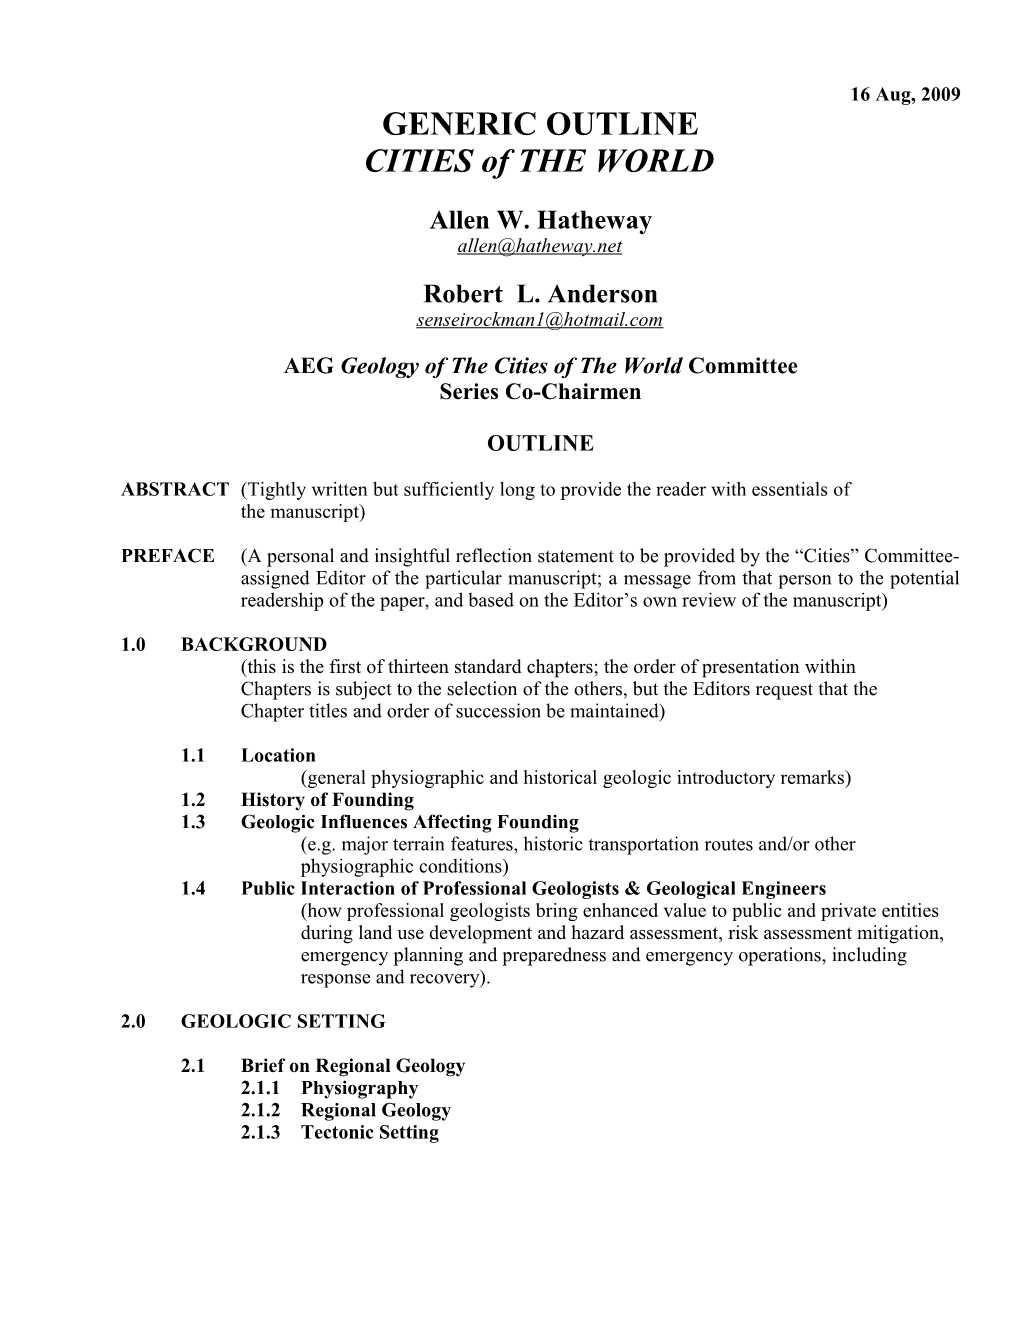 AEG Geology of the Cities of the World Committee